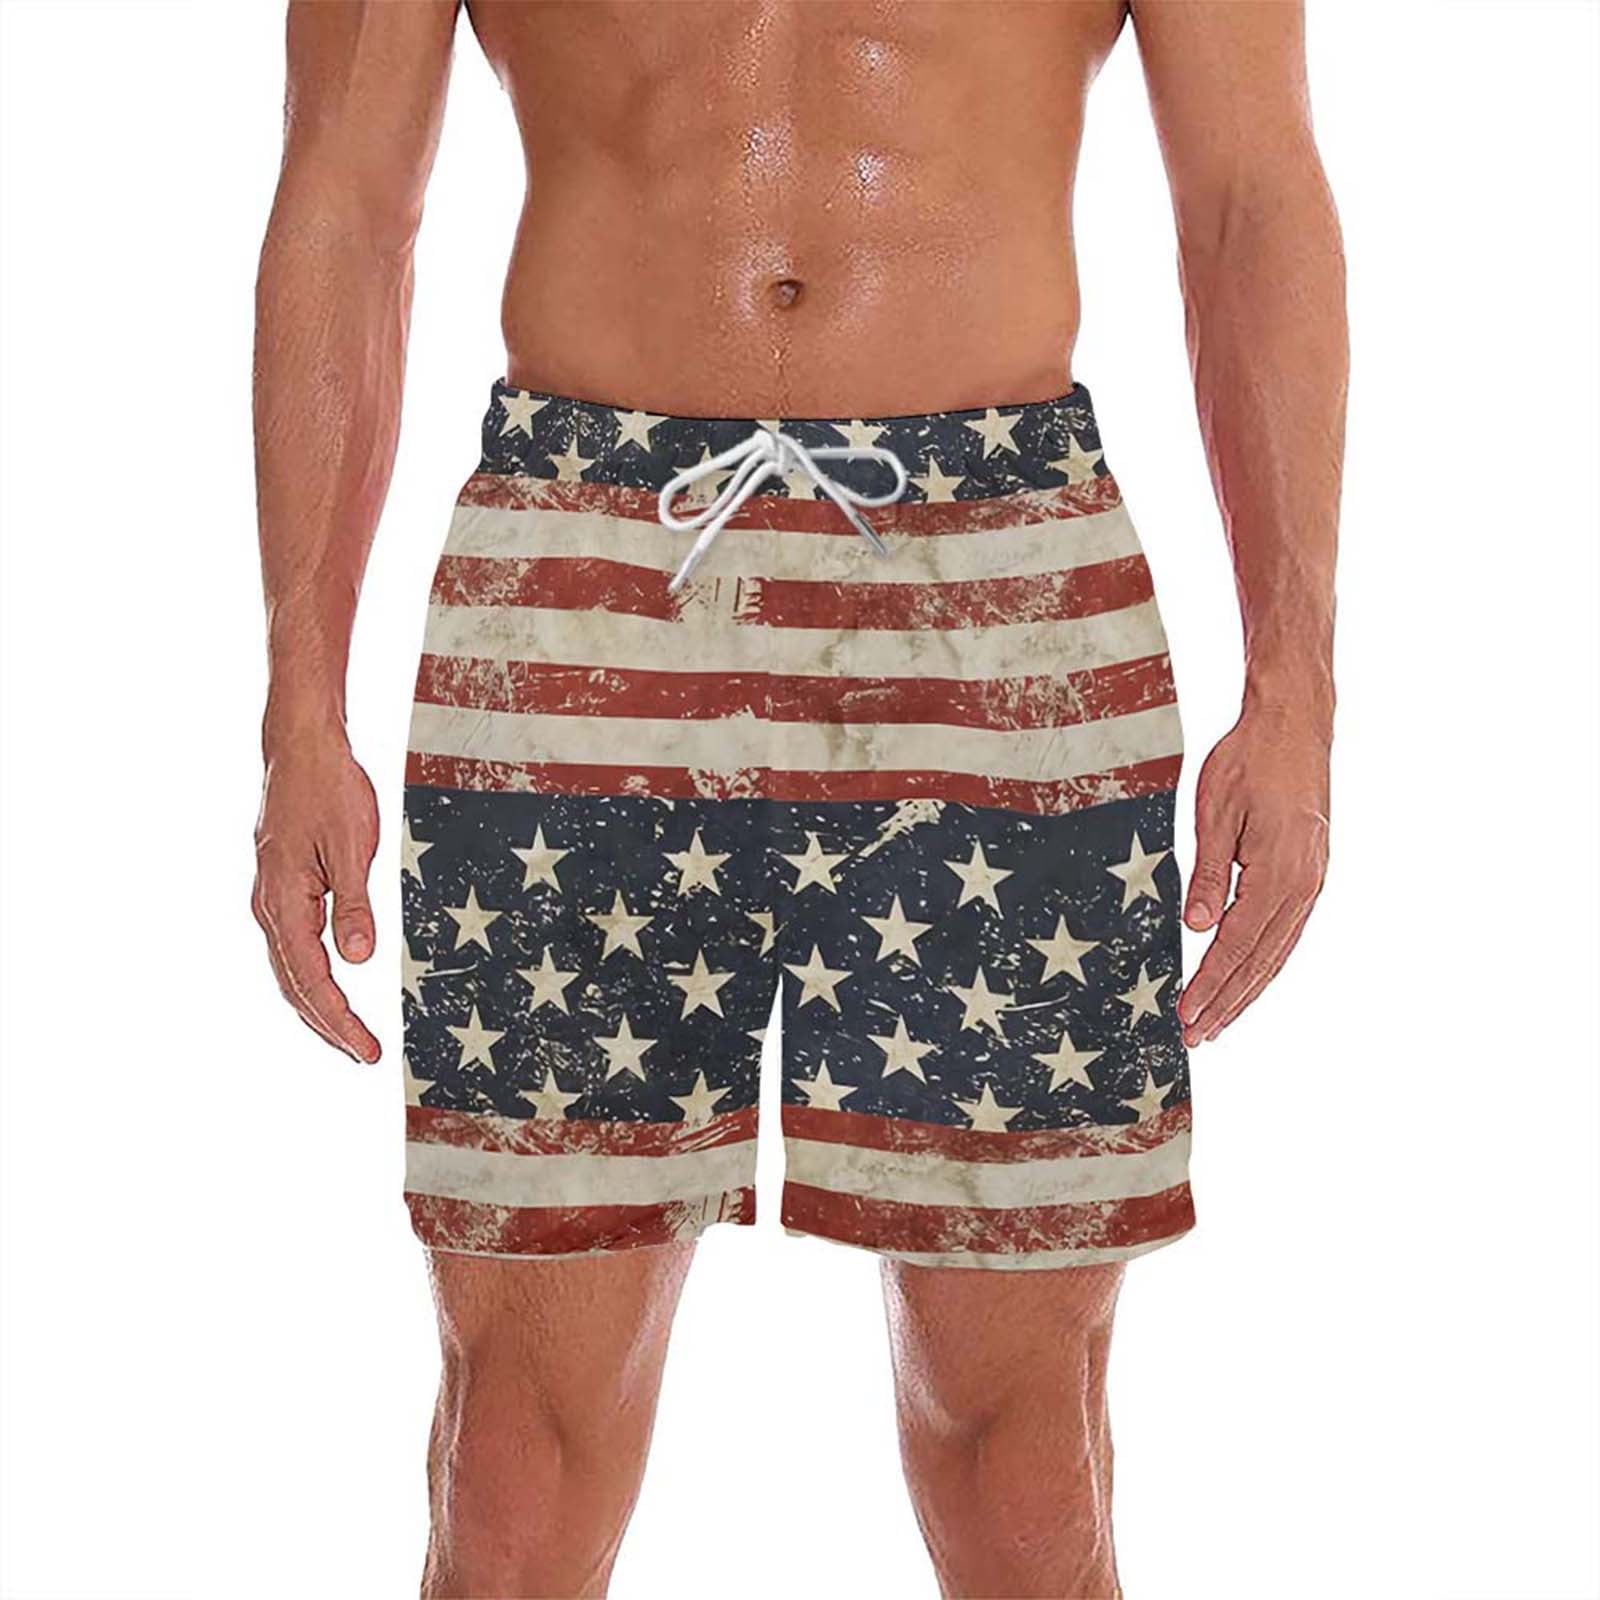 QRANSS Mens Solid Swim Trunks Quick Dry Csual Beach Swim Shorts for Home & Outdoor 